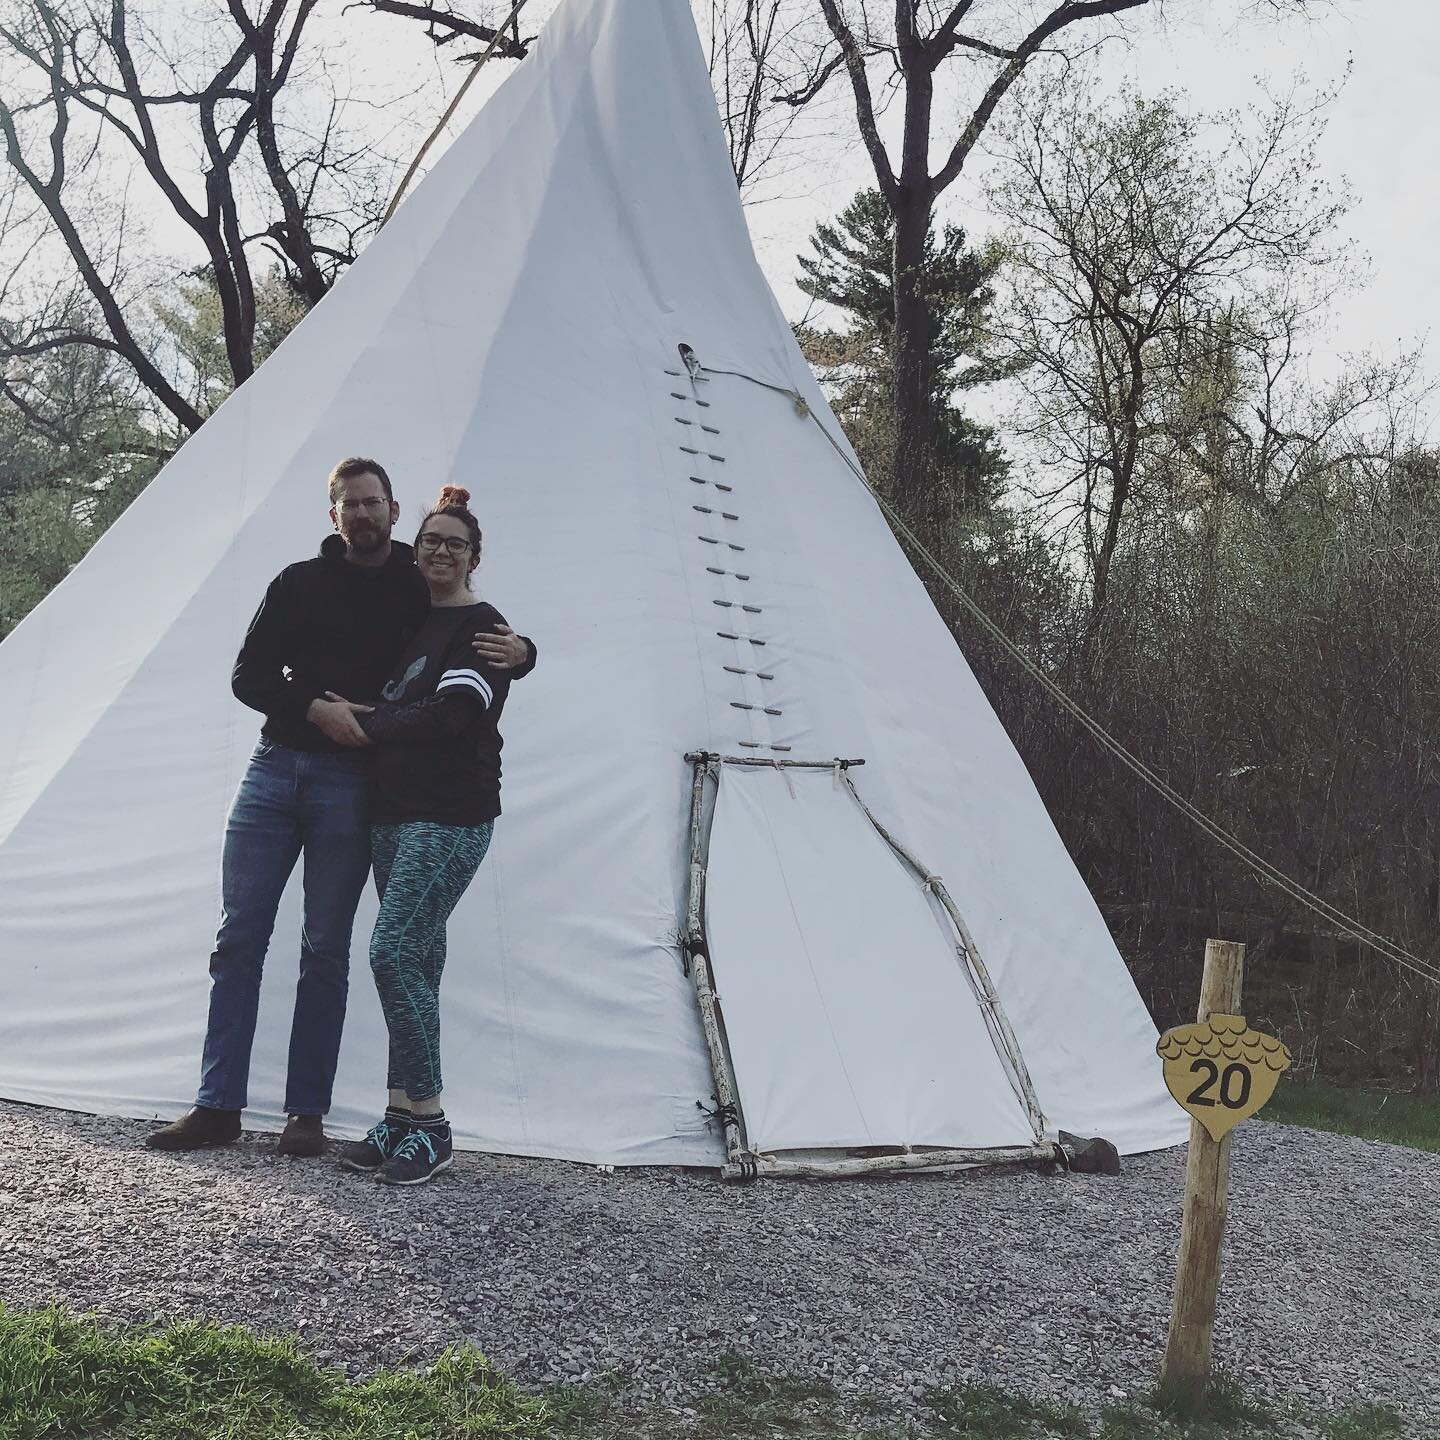 Glamping at it&rsquo;s finest!

@royaloakslegendarylodging 

#glamp #teepeetent #teepee #camping #cozy #wisconsin #wisconsinlife #glamping #camp #campingtrip